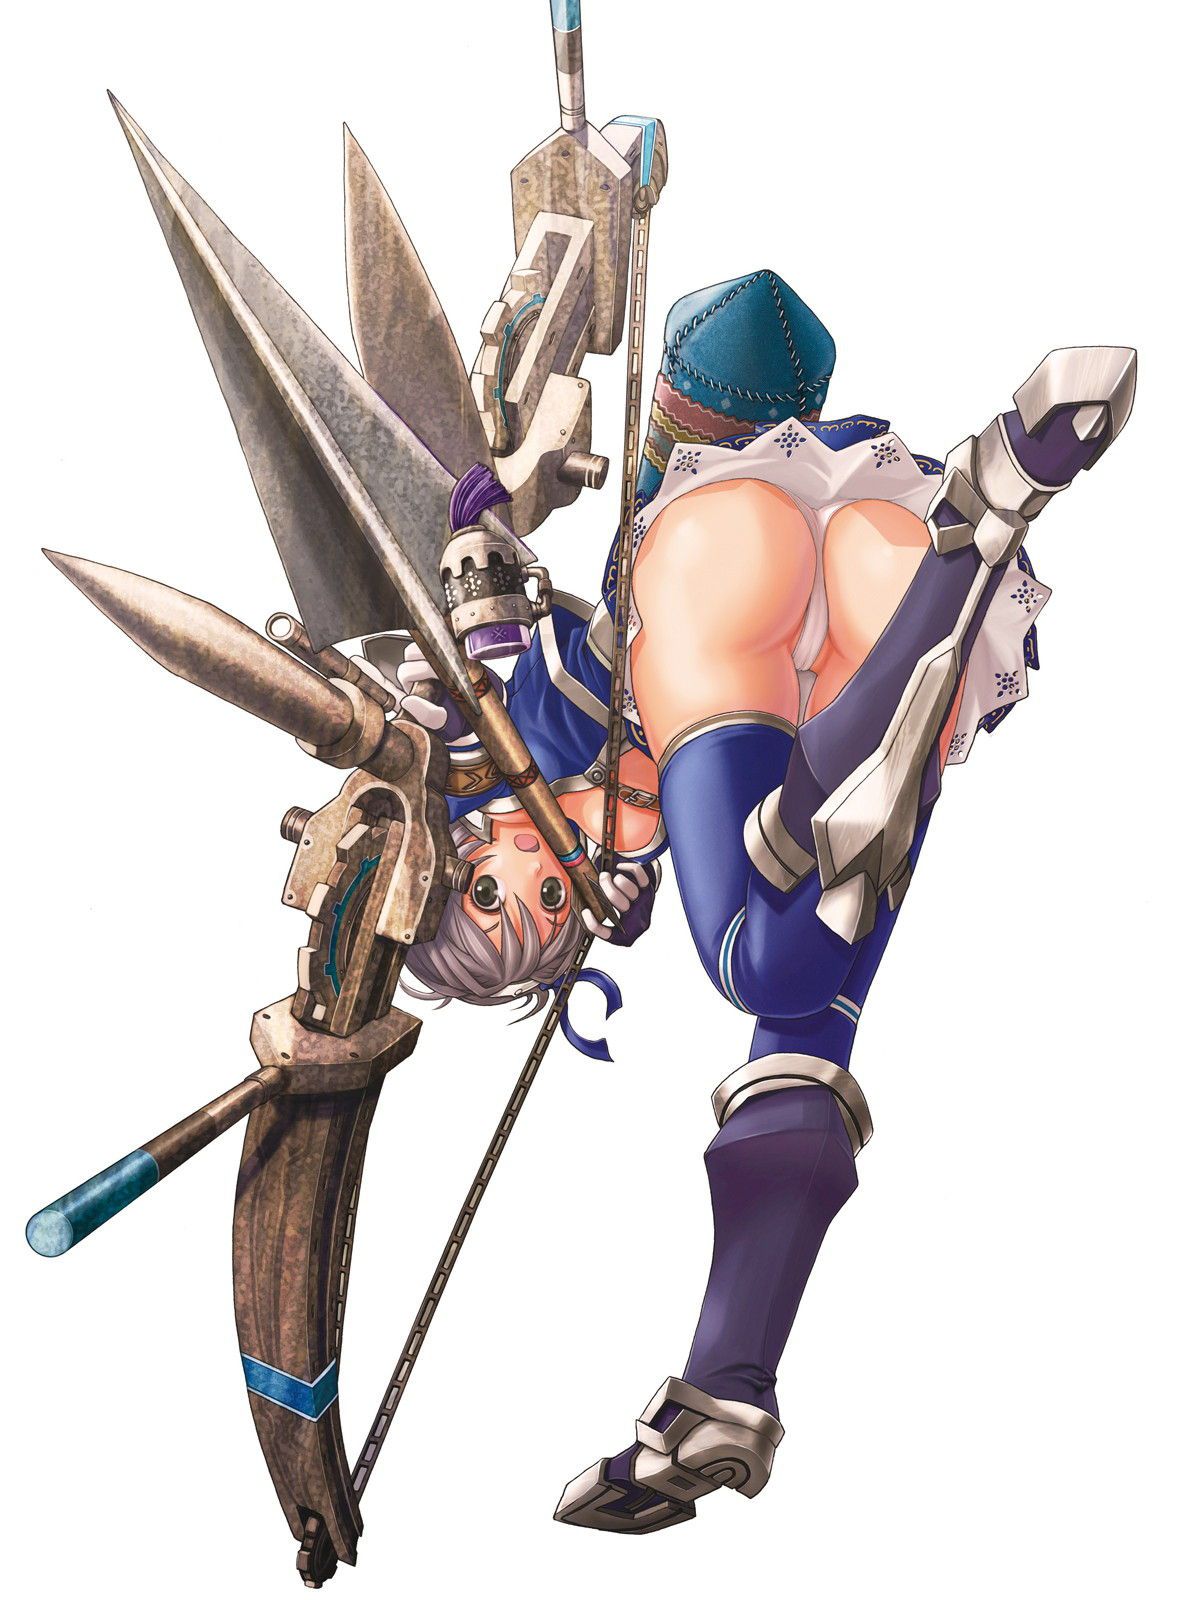 Please picture too erotic of Monster hunter! 22